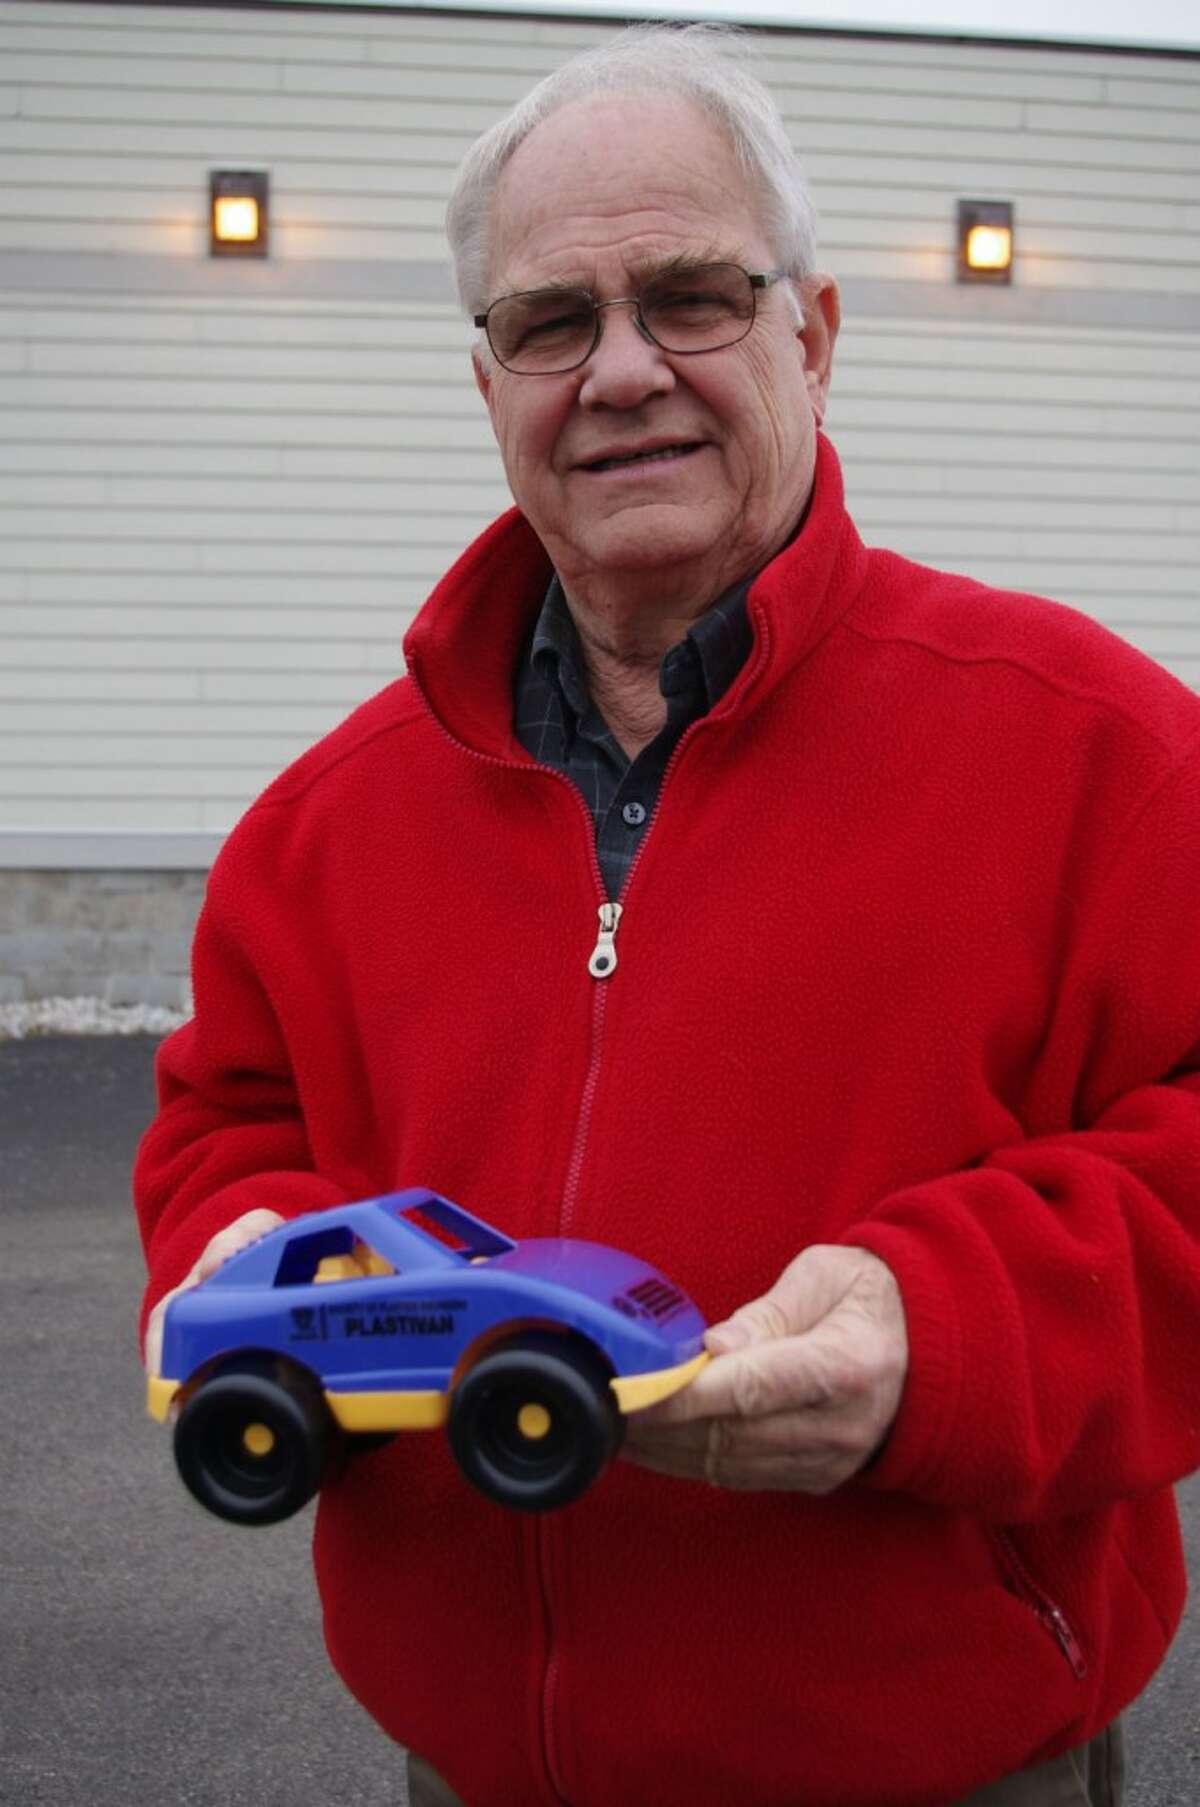 Corey Van Fleet, executive director of United Way of Manistee County, holds one of the toy trucks that will be distributed to children in the area. (Dave Yarnell/News Advocate)